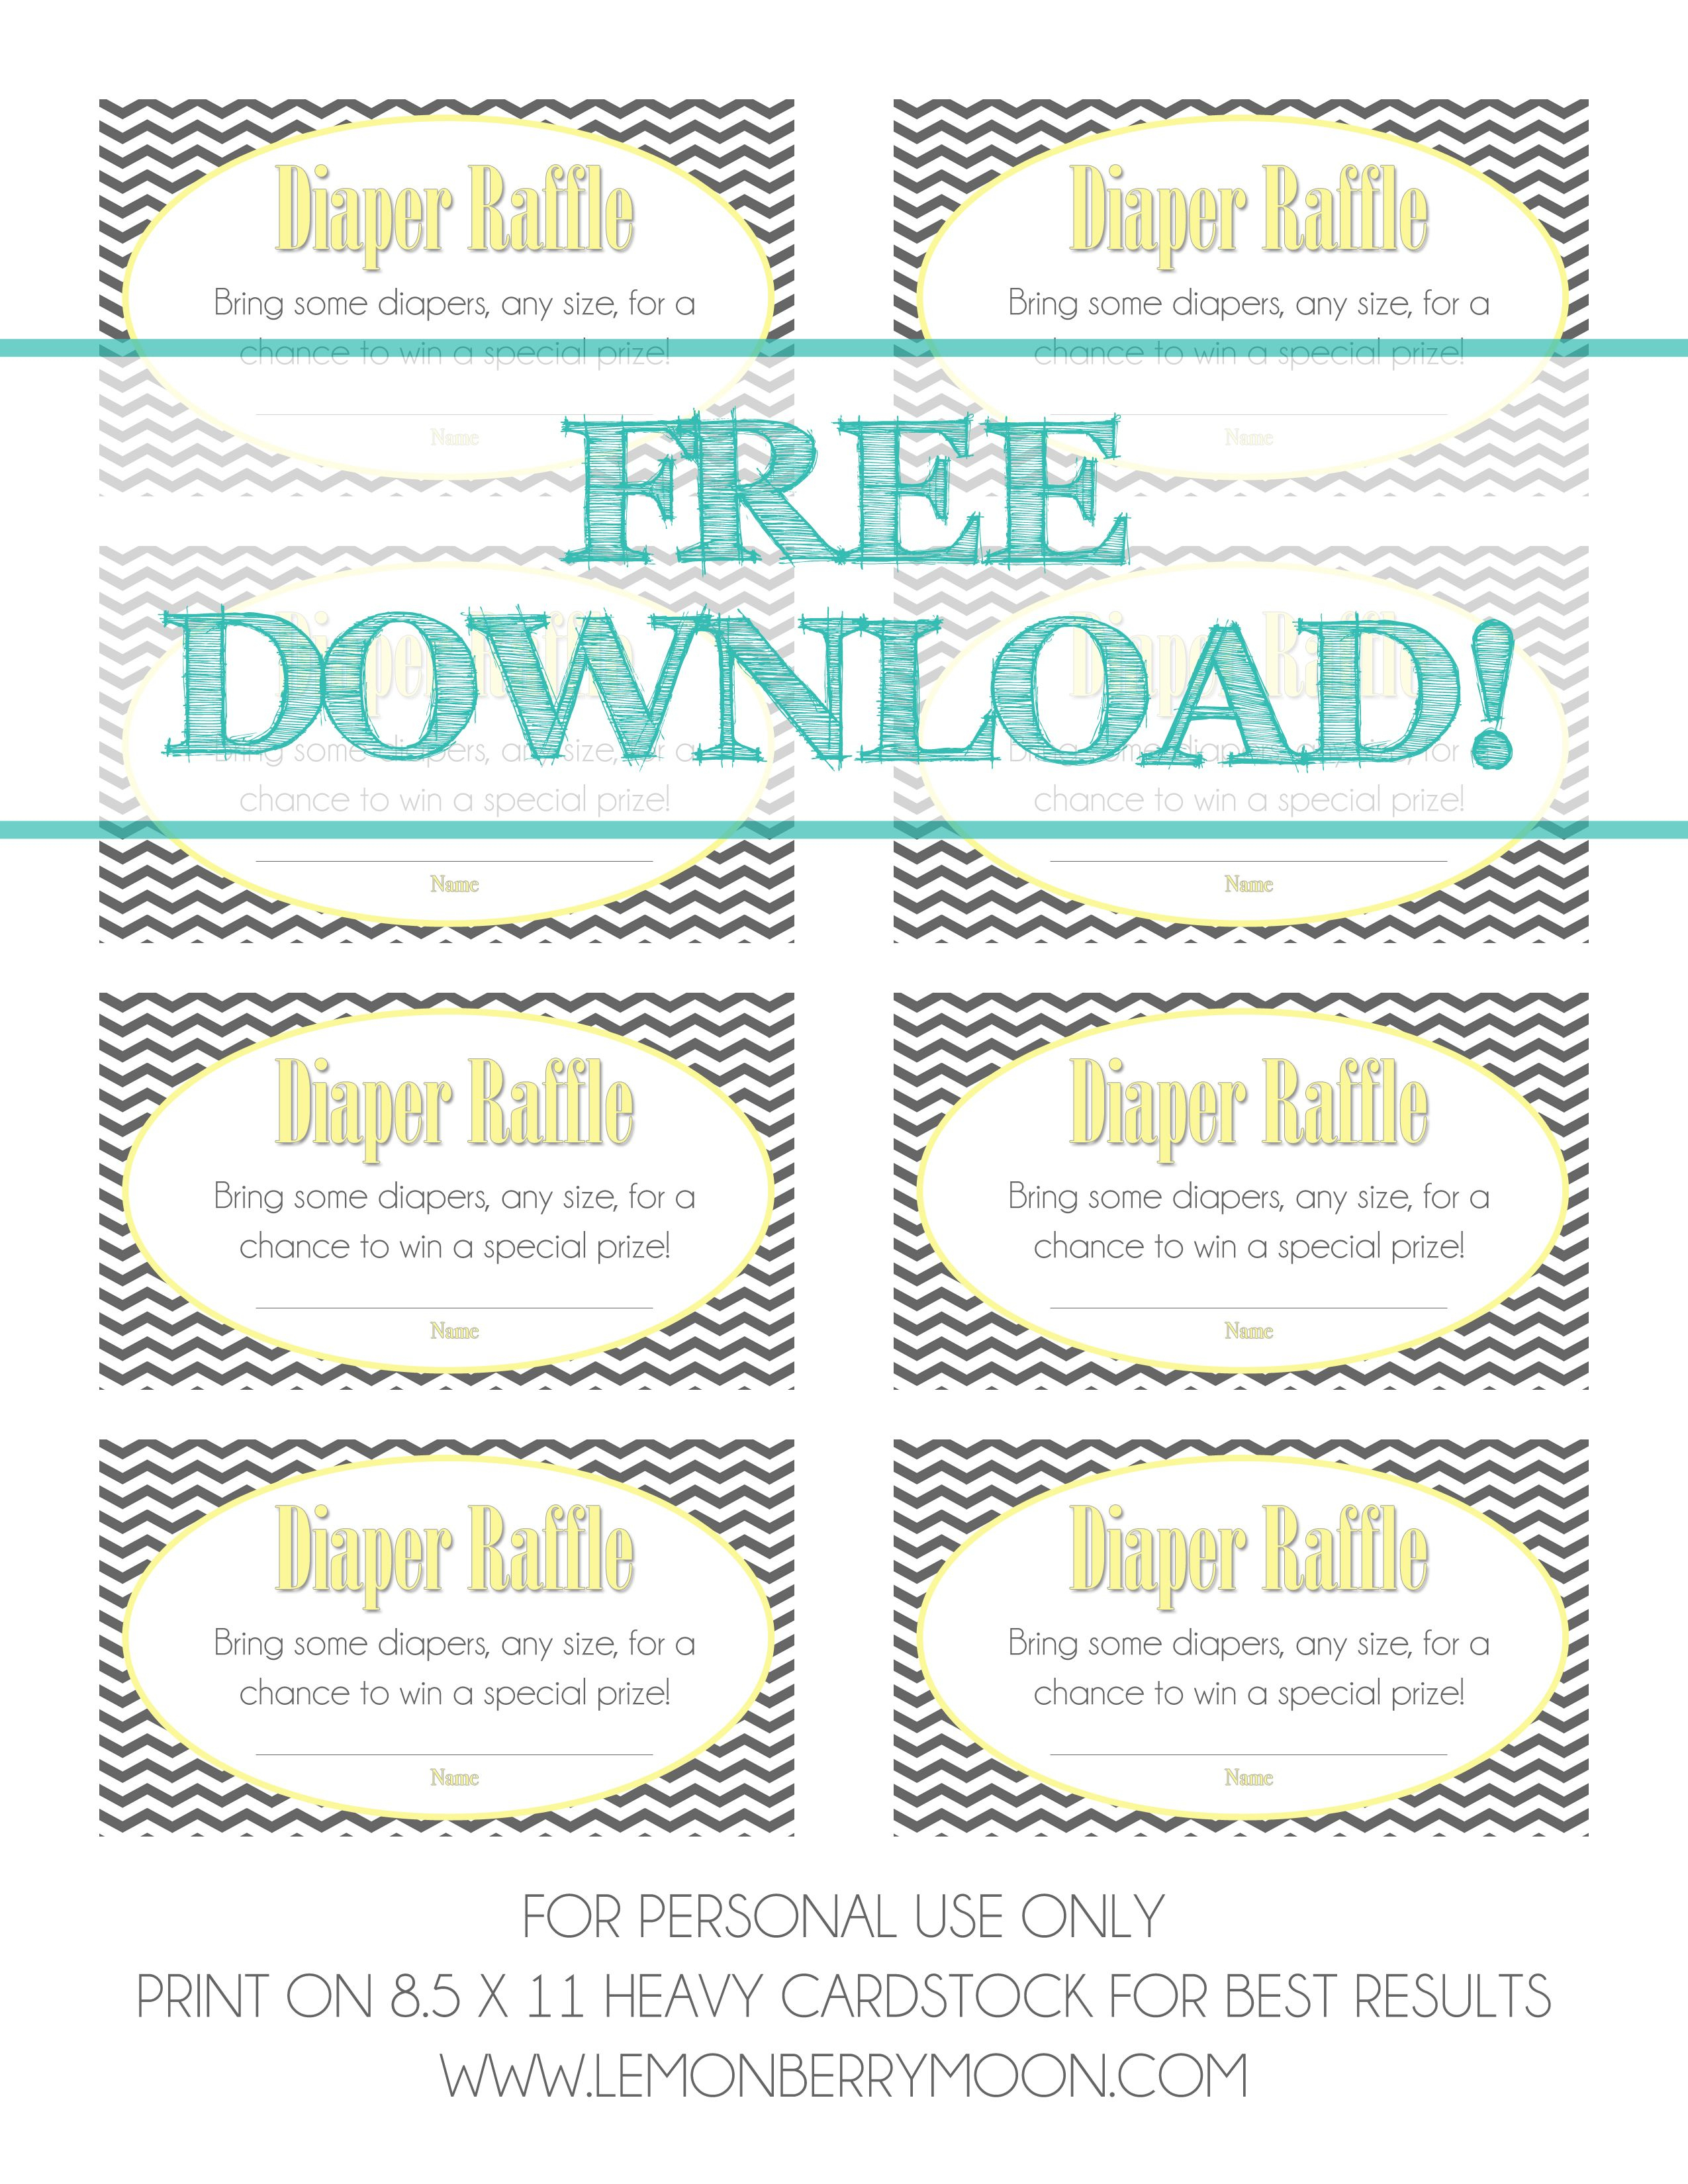 Free Download - Baby Diaper Raffle Template | Baaby Shower | Baby - Free Printable Diaper Raffle Ticket Template